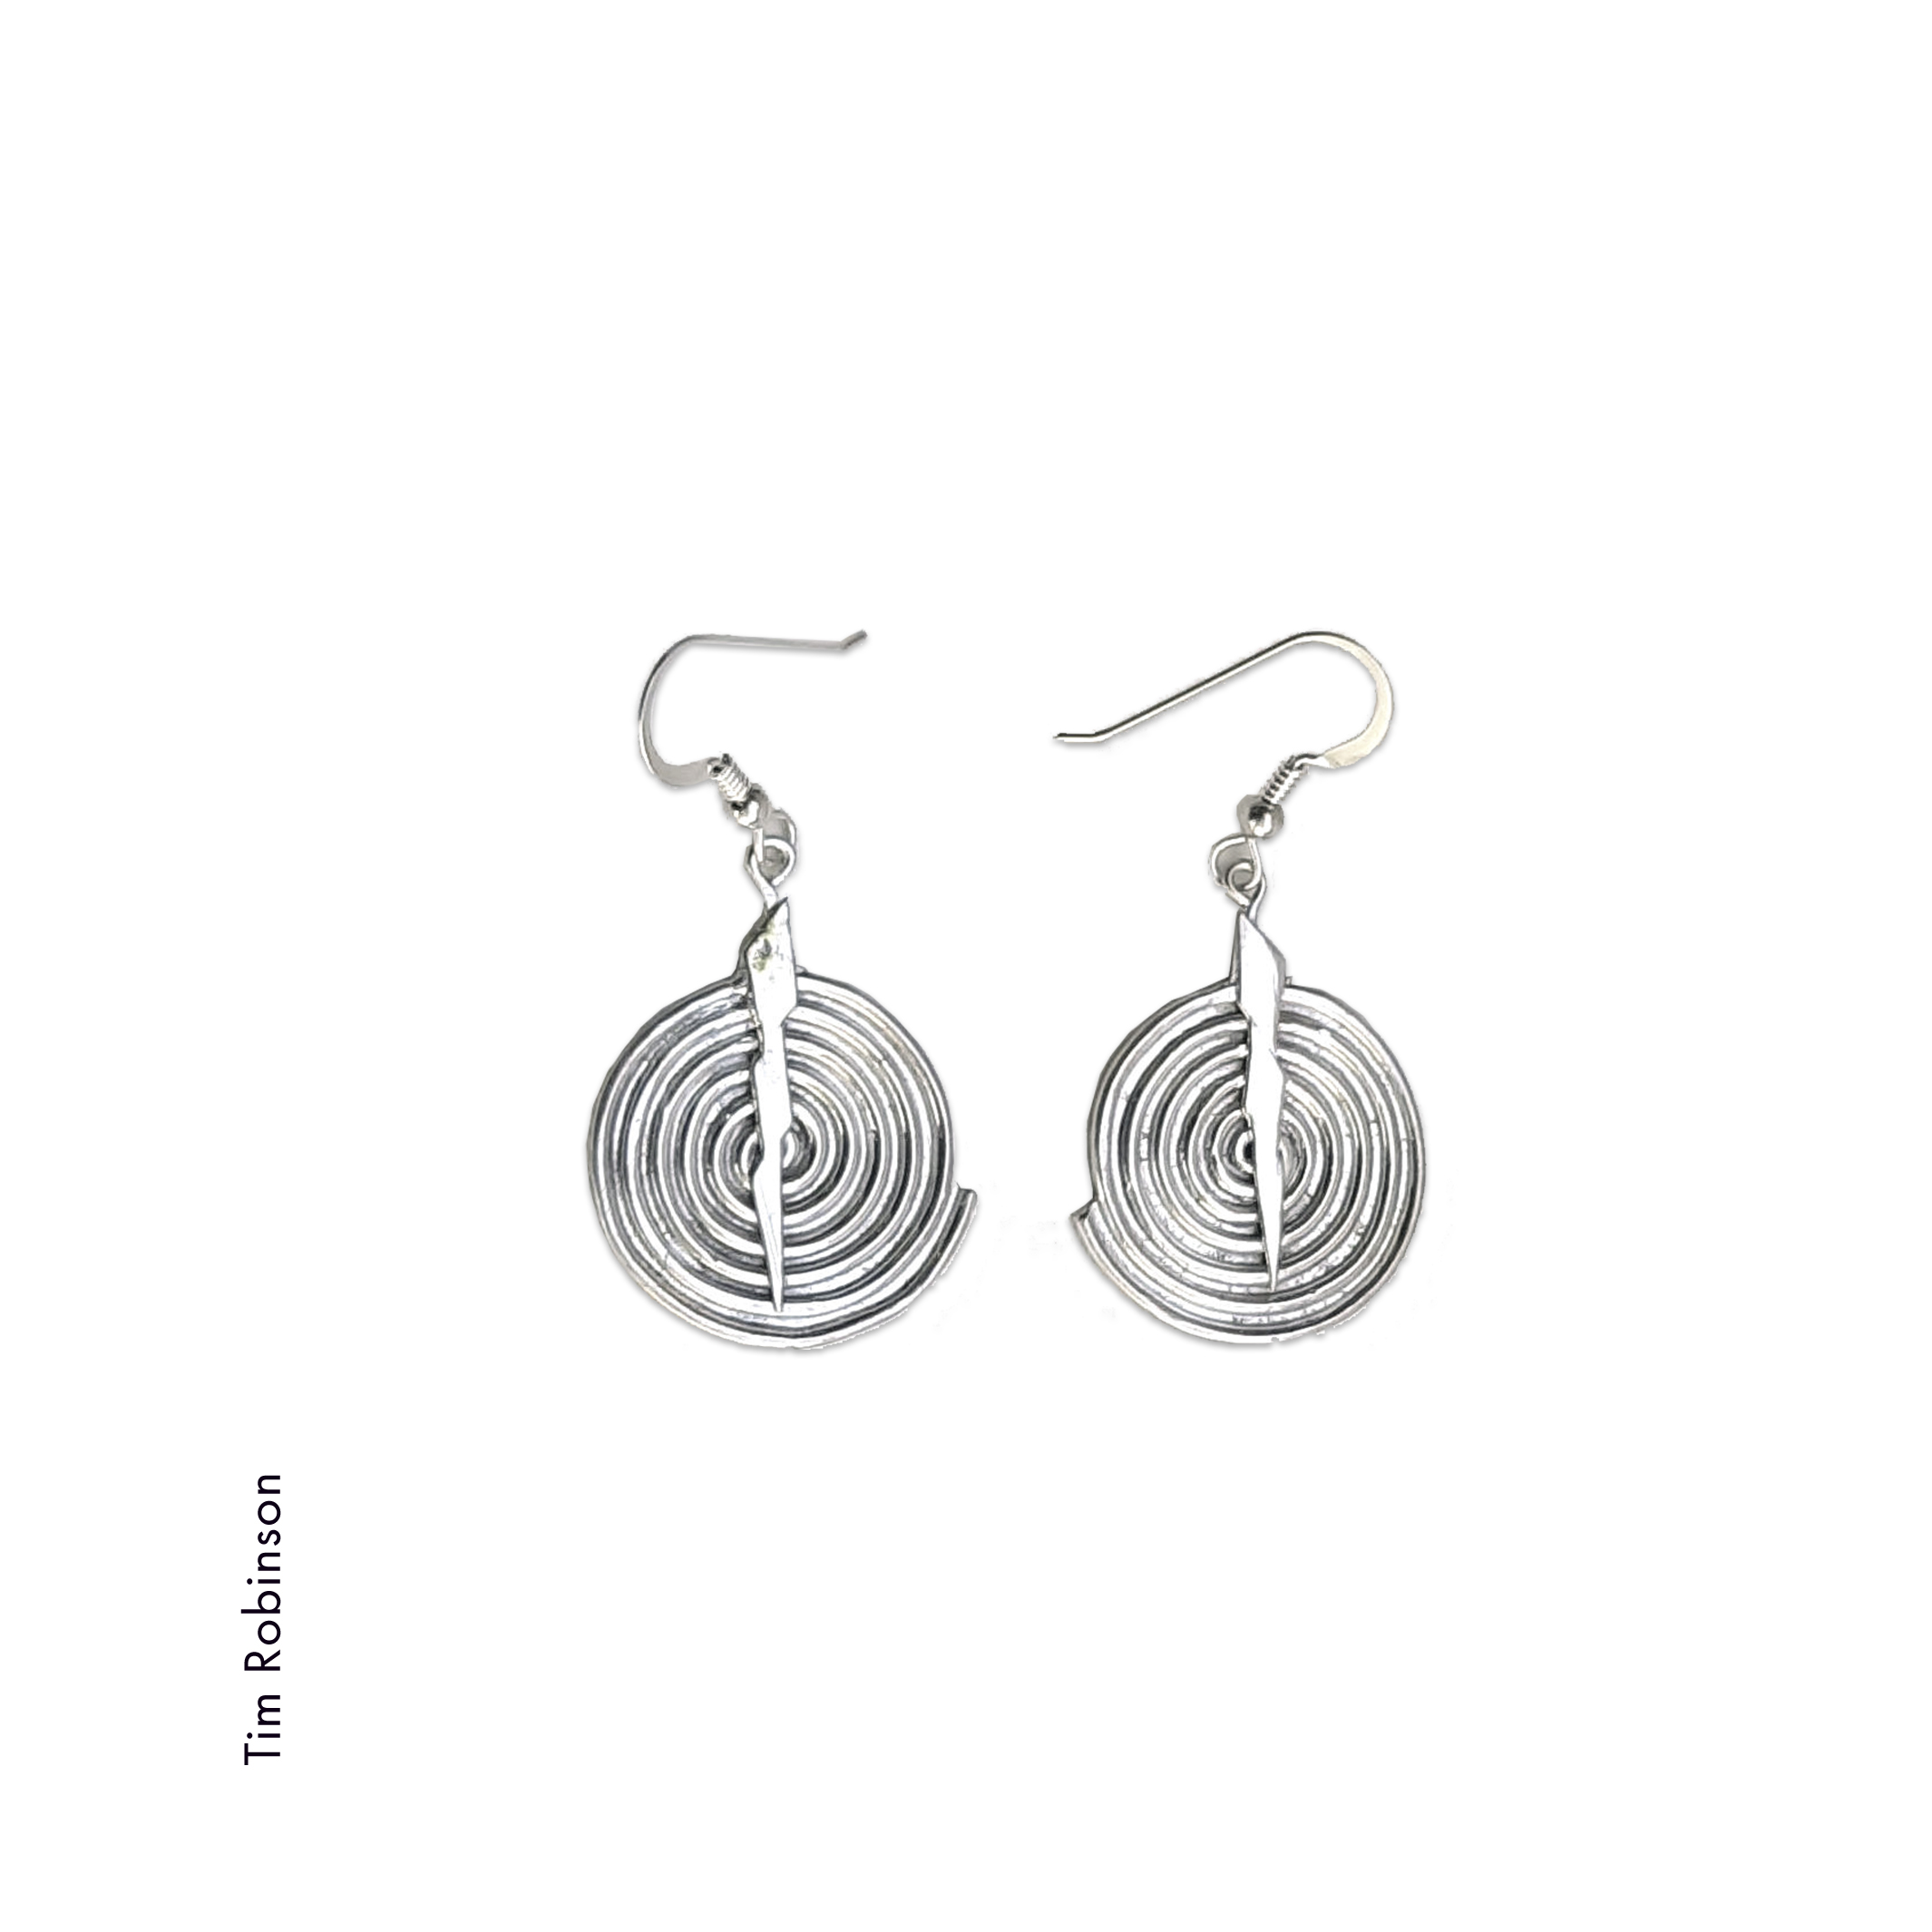 spiral sterling silver earrings; made of round wire formed into spirals. A lightning bolt shape down the center holds the ear wires. Earrings by Tim Robinson